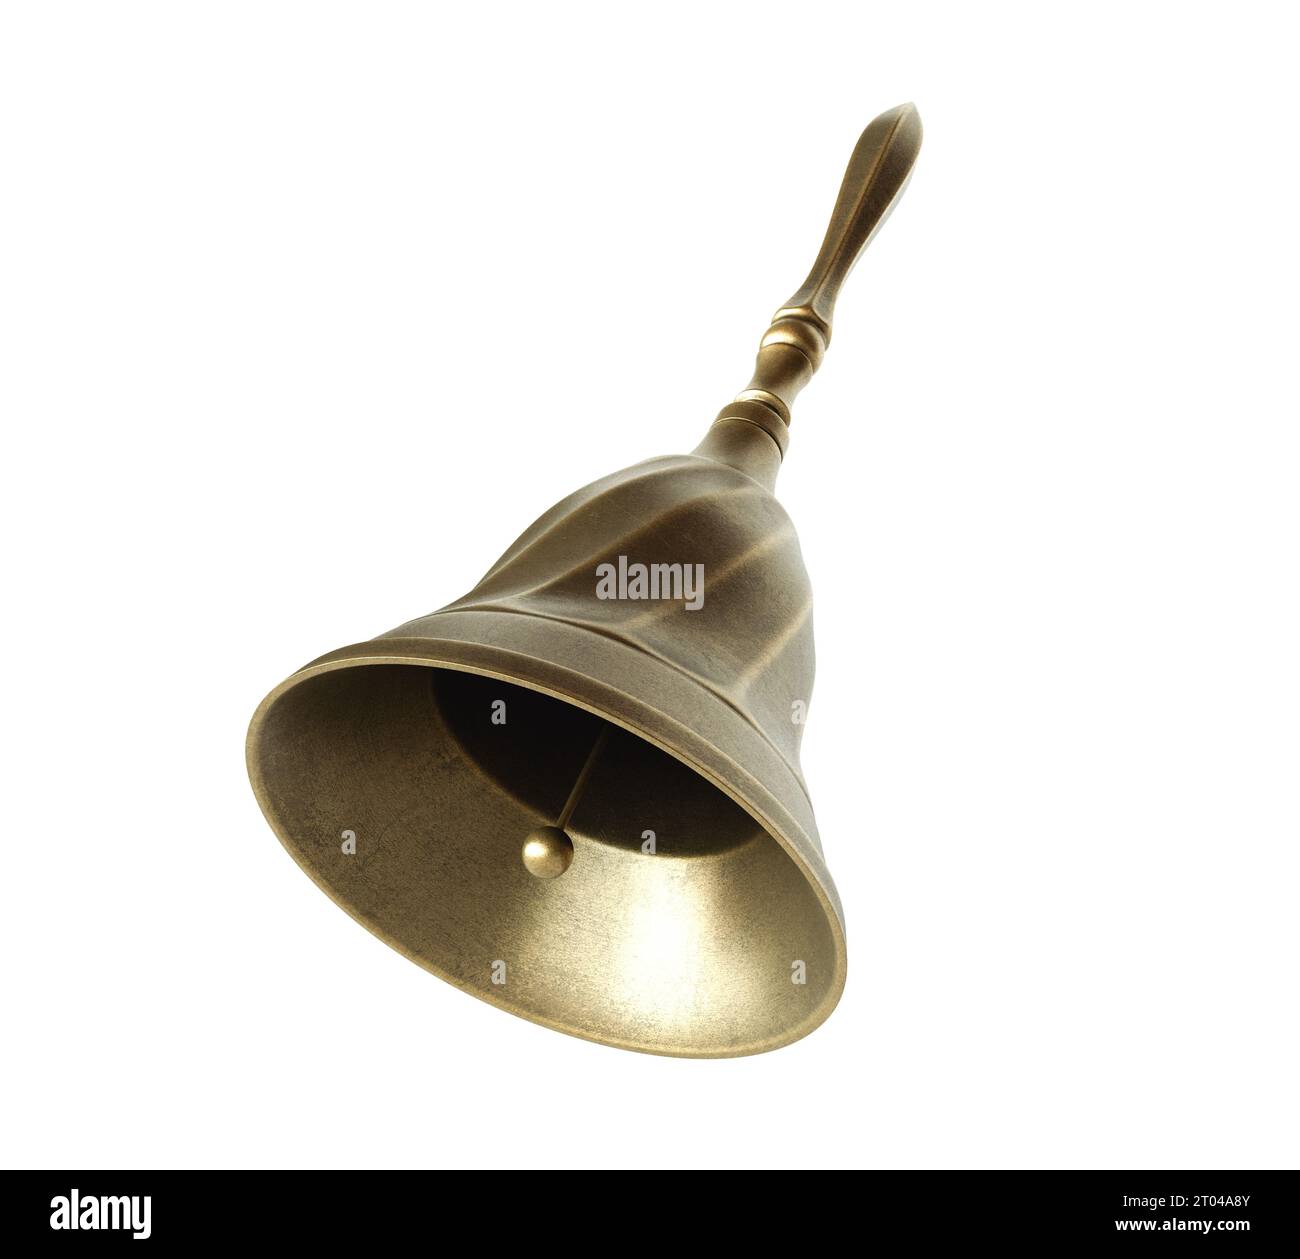 A small ornate antique service bell with a handle on an isolated white background - 3D render Stock Photo